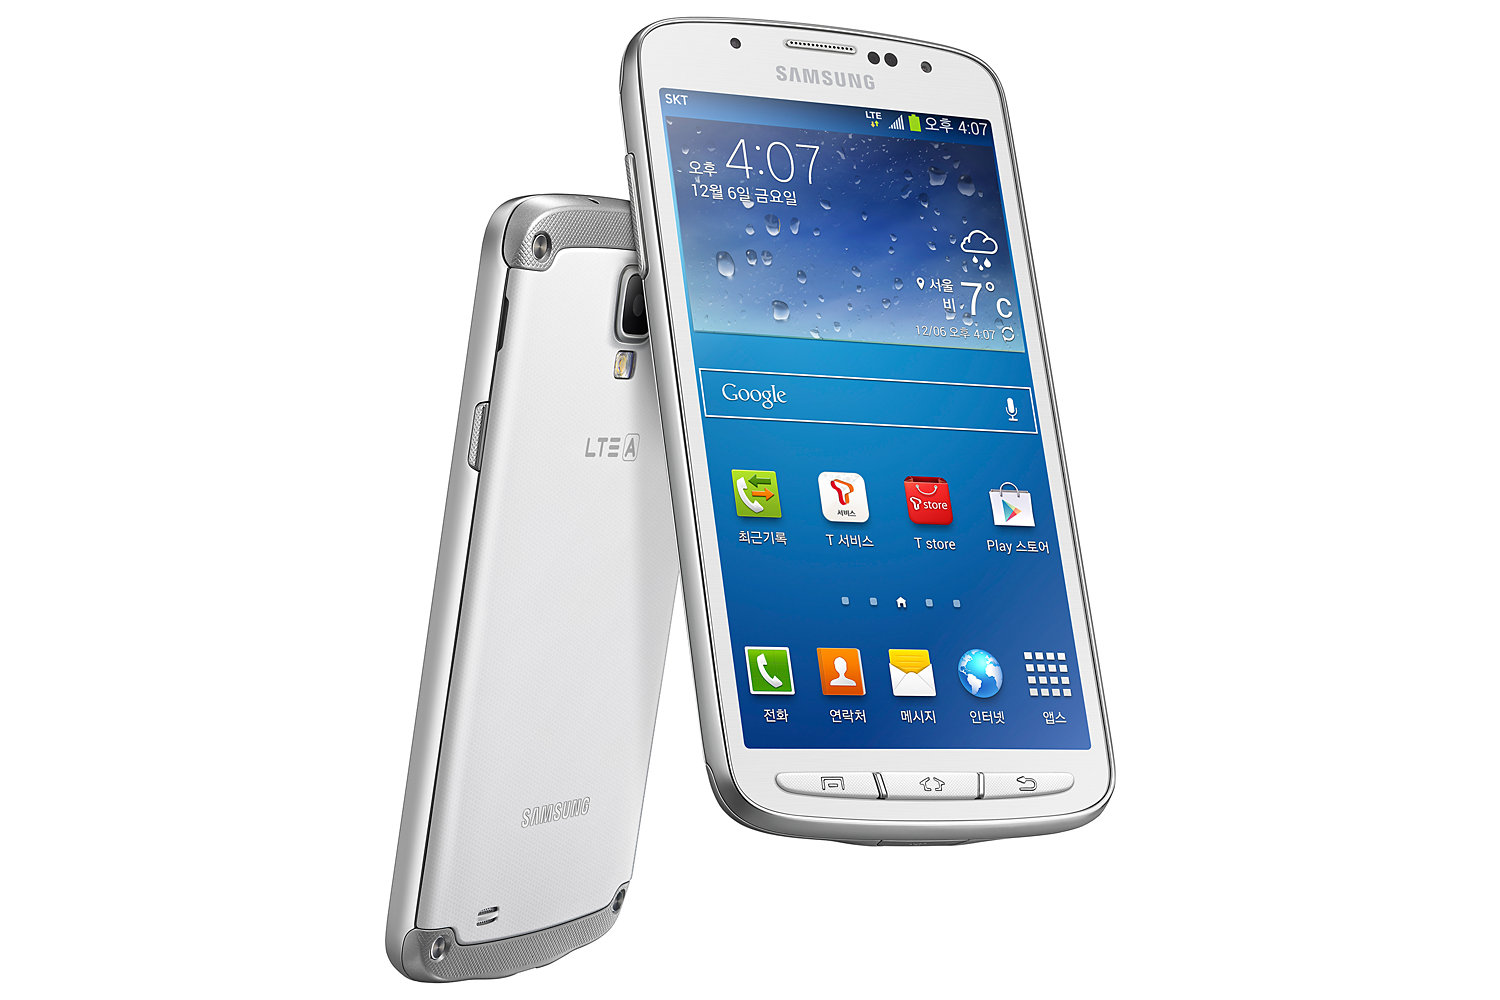 Samsung Galaxy S4 Active LTE-A with Snapdragon 800 processor officially